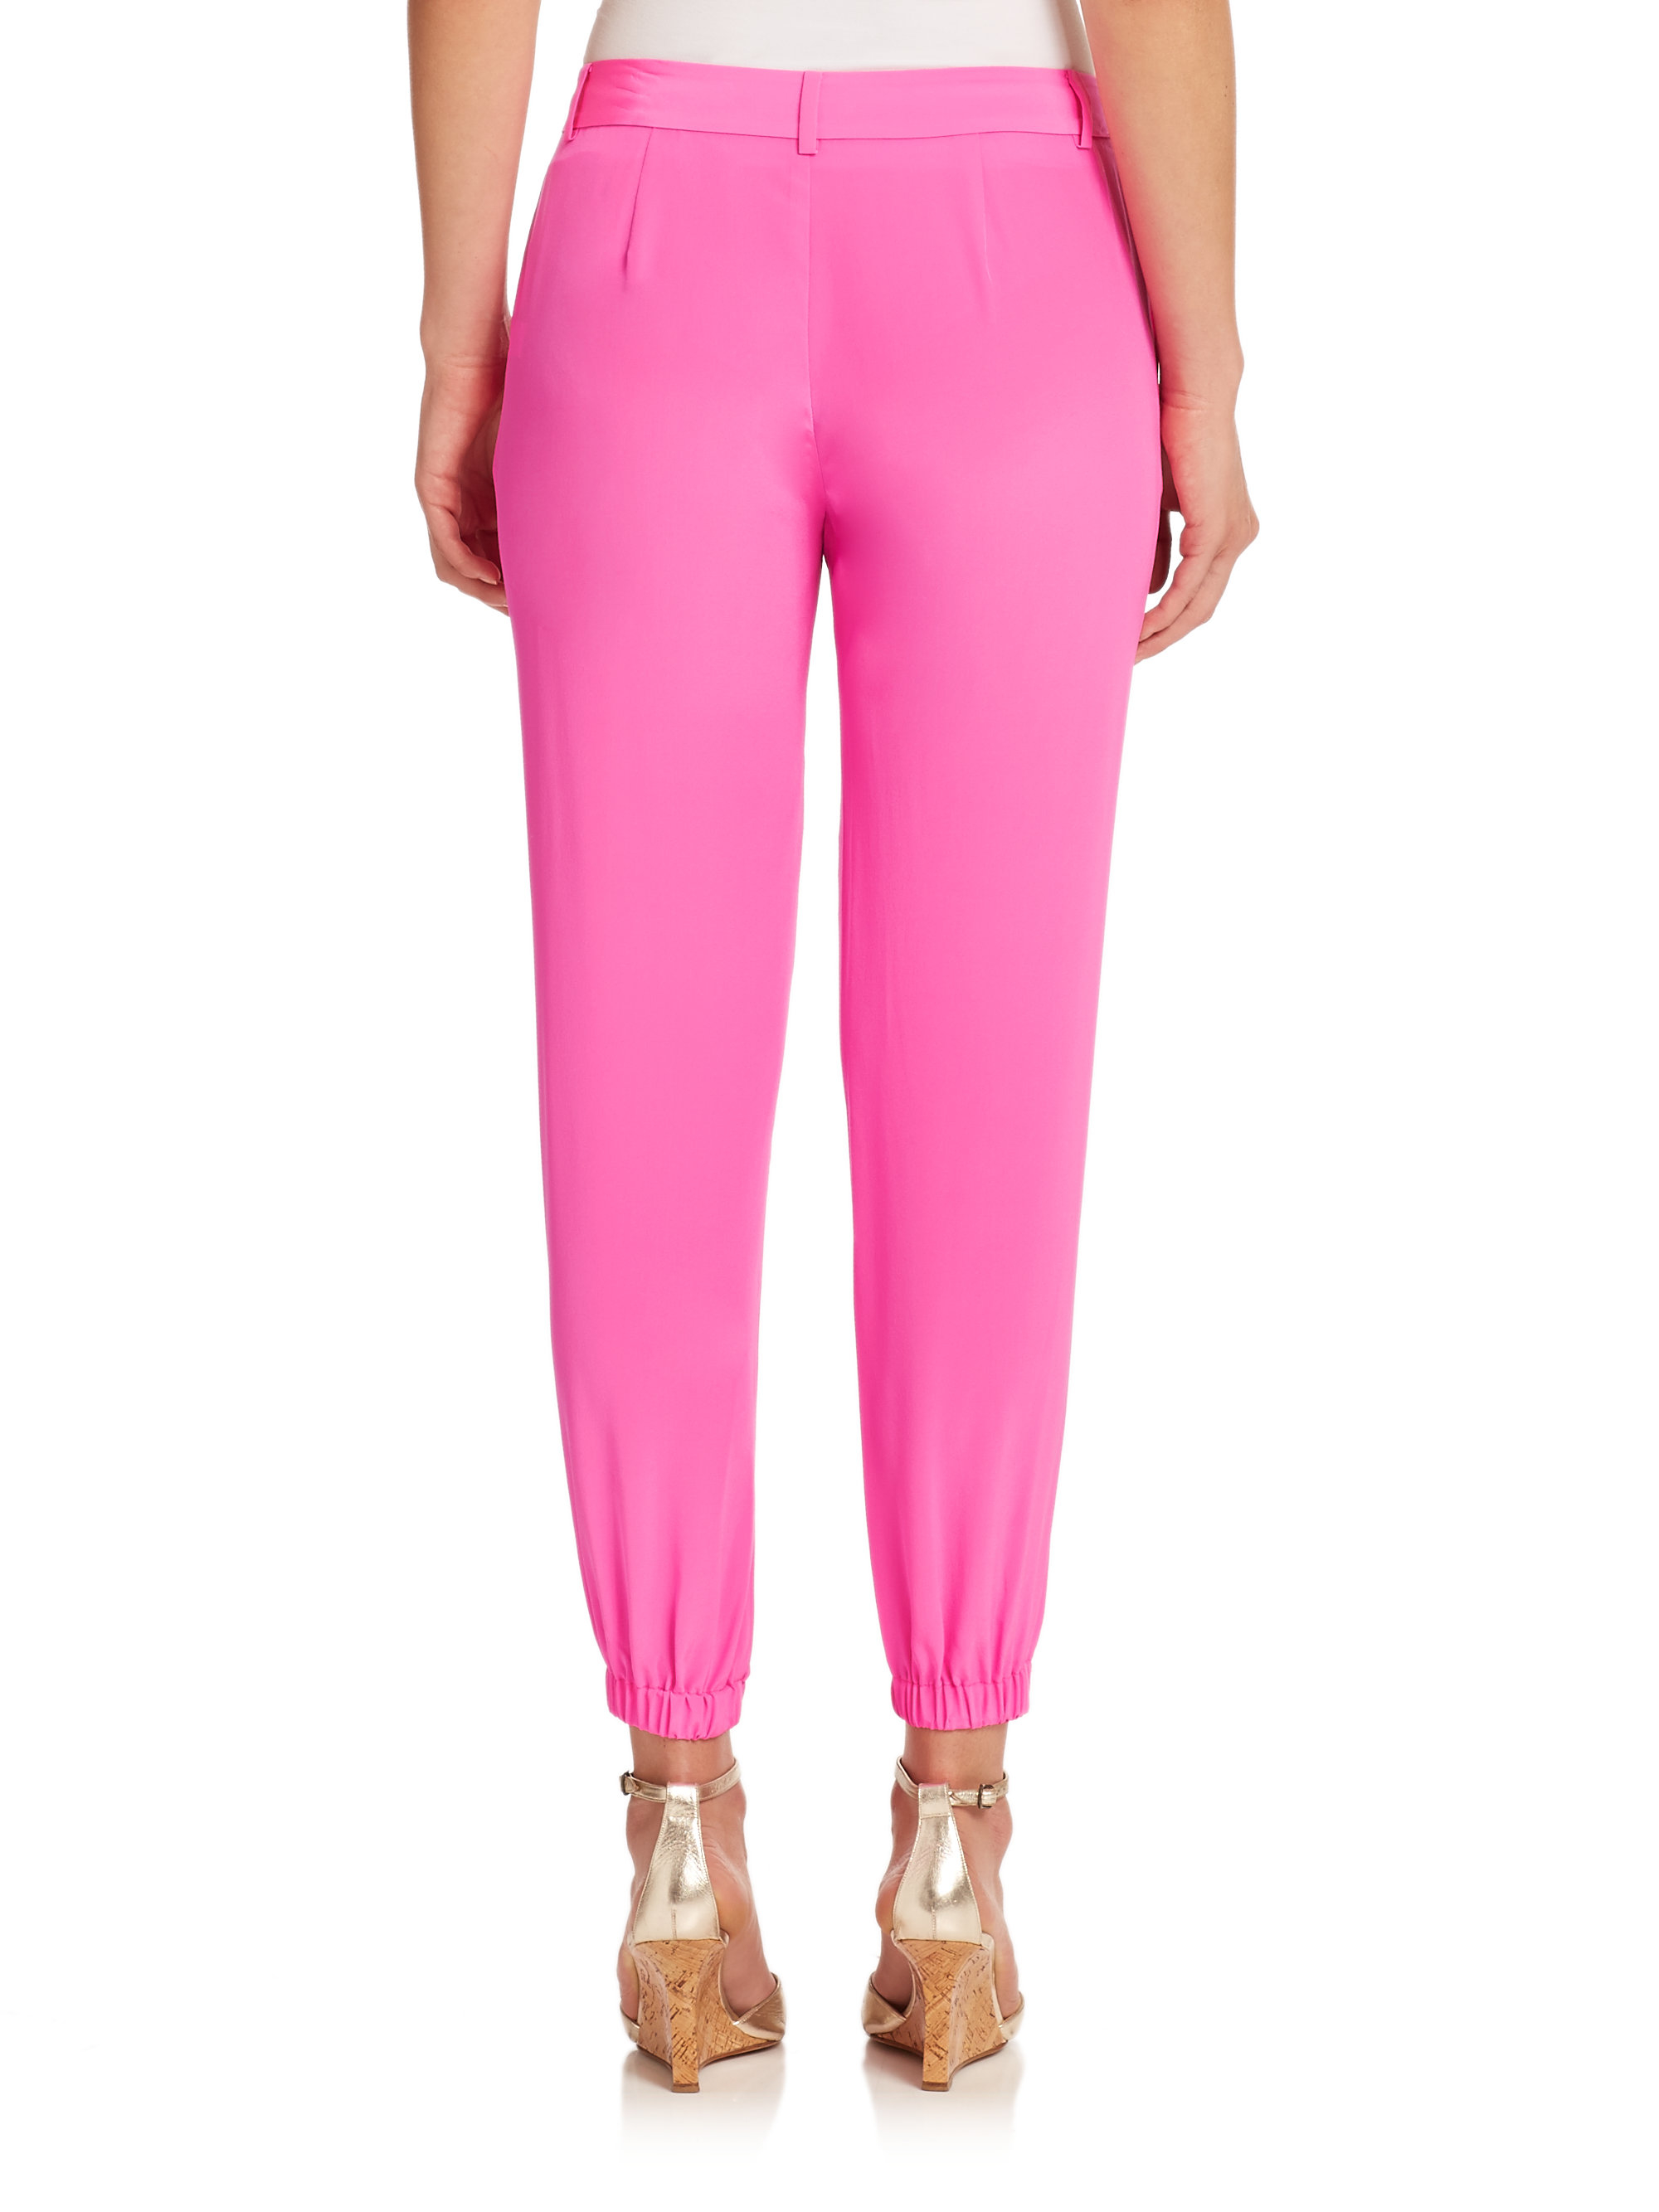 Lyst - Lilly Pulitzer Solstice Silk Ankle Pants in Pink